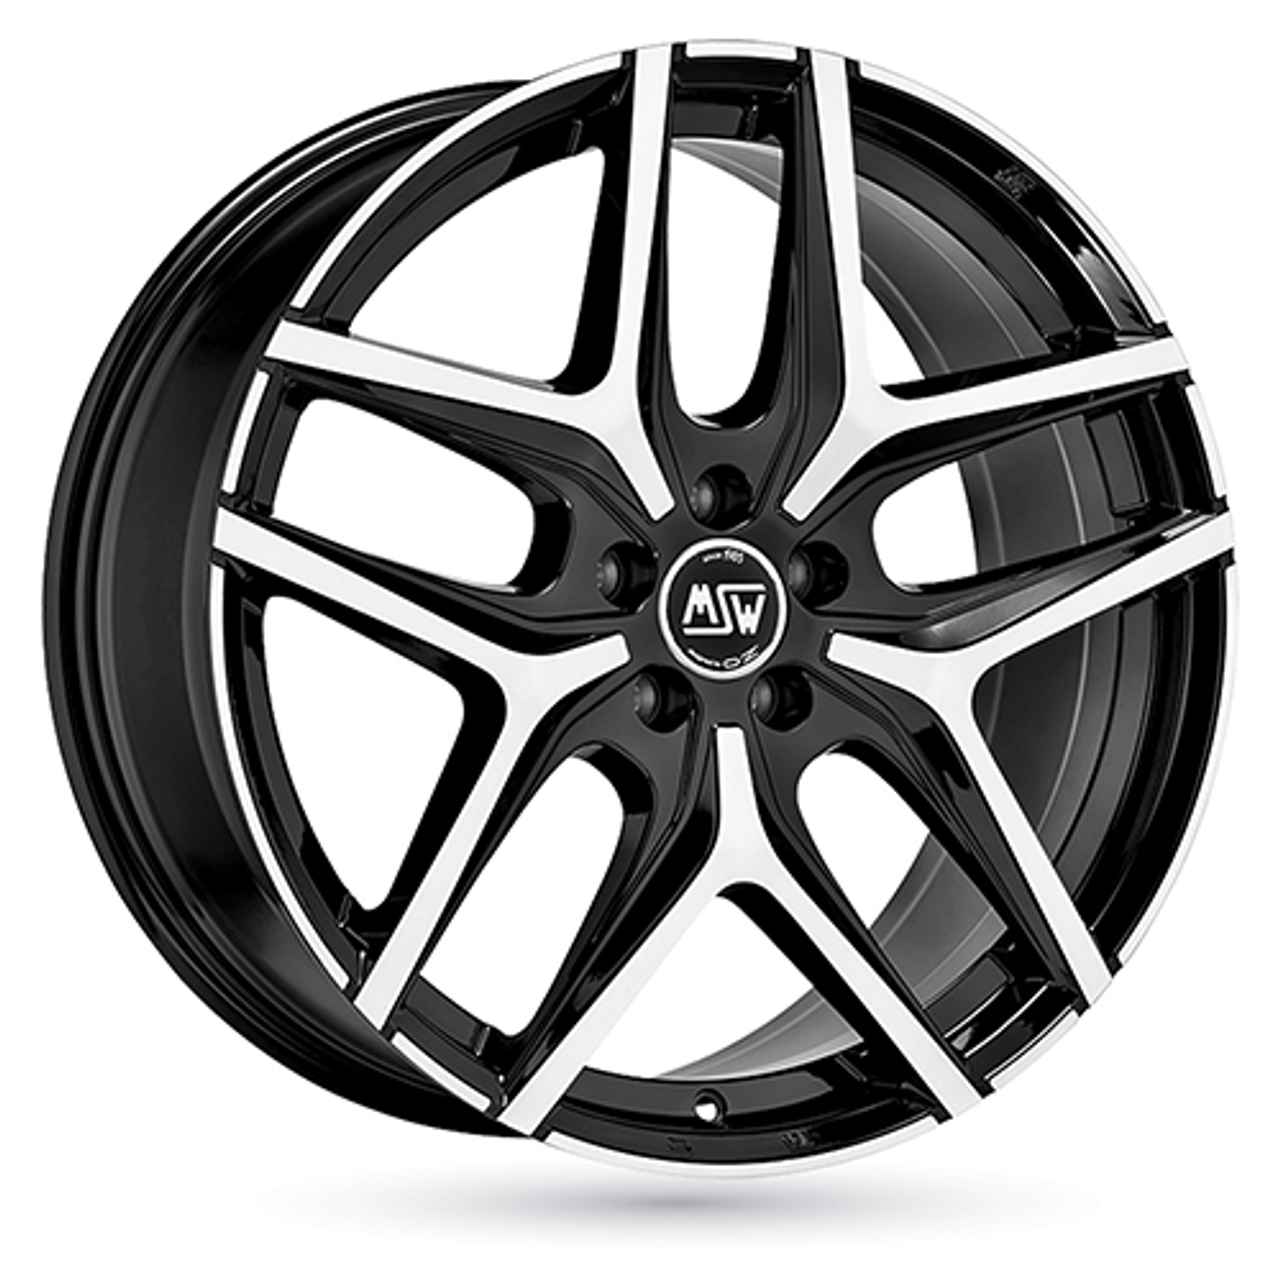 MSW (OZ) MSW 40 gloss black full polished 7.5Jx19 5x112 ET42